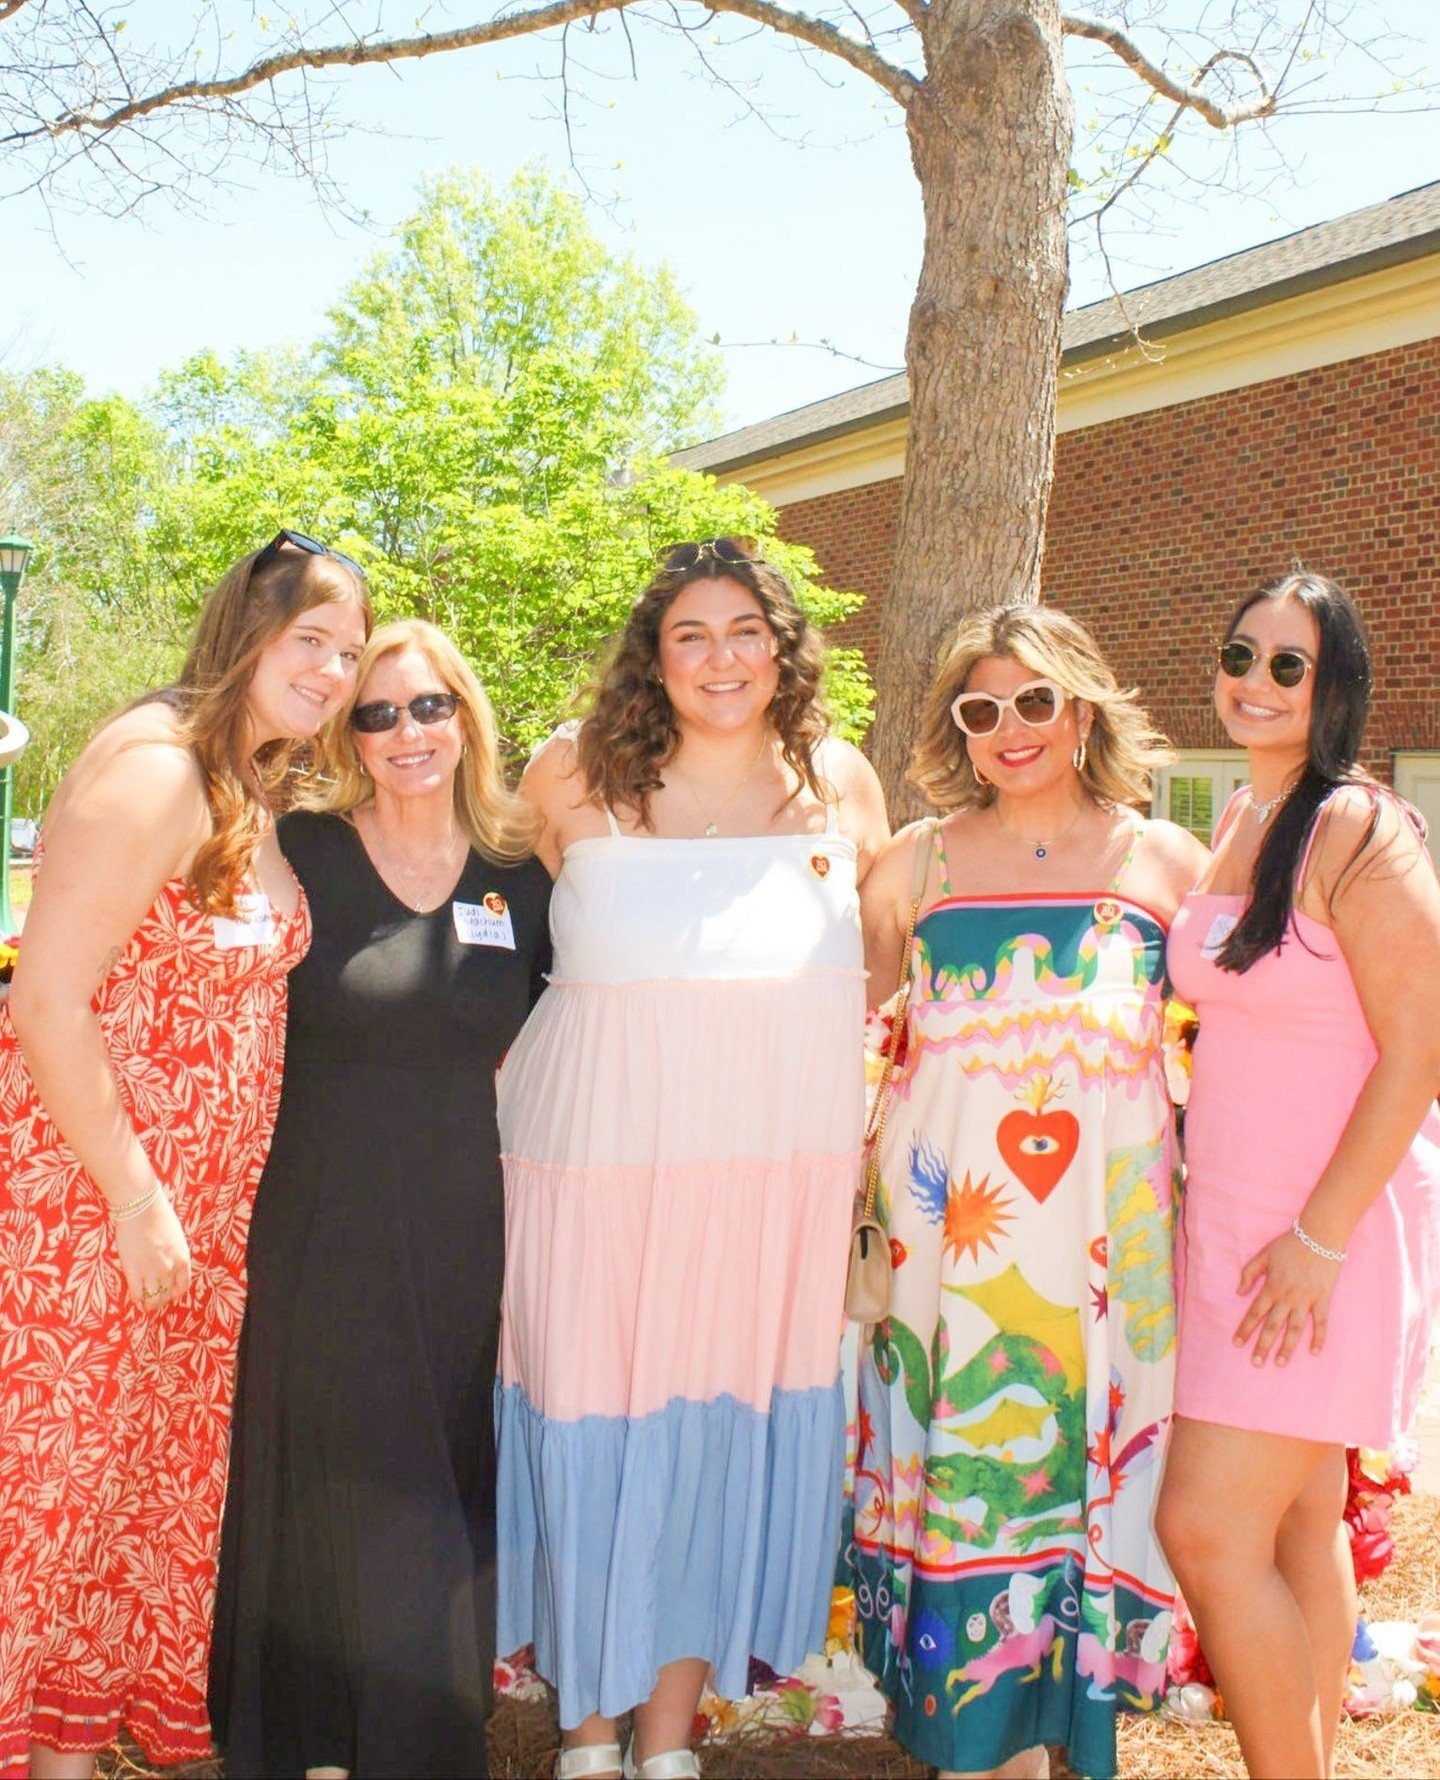 Happy Mother's Day to our Chi Omega mothers and maternal figures! We are so appreciative of their love and support all year long! 💛🧡🌷